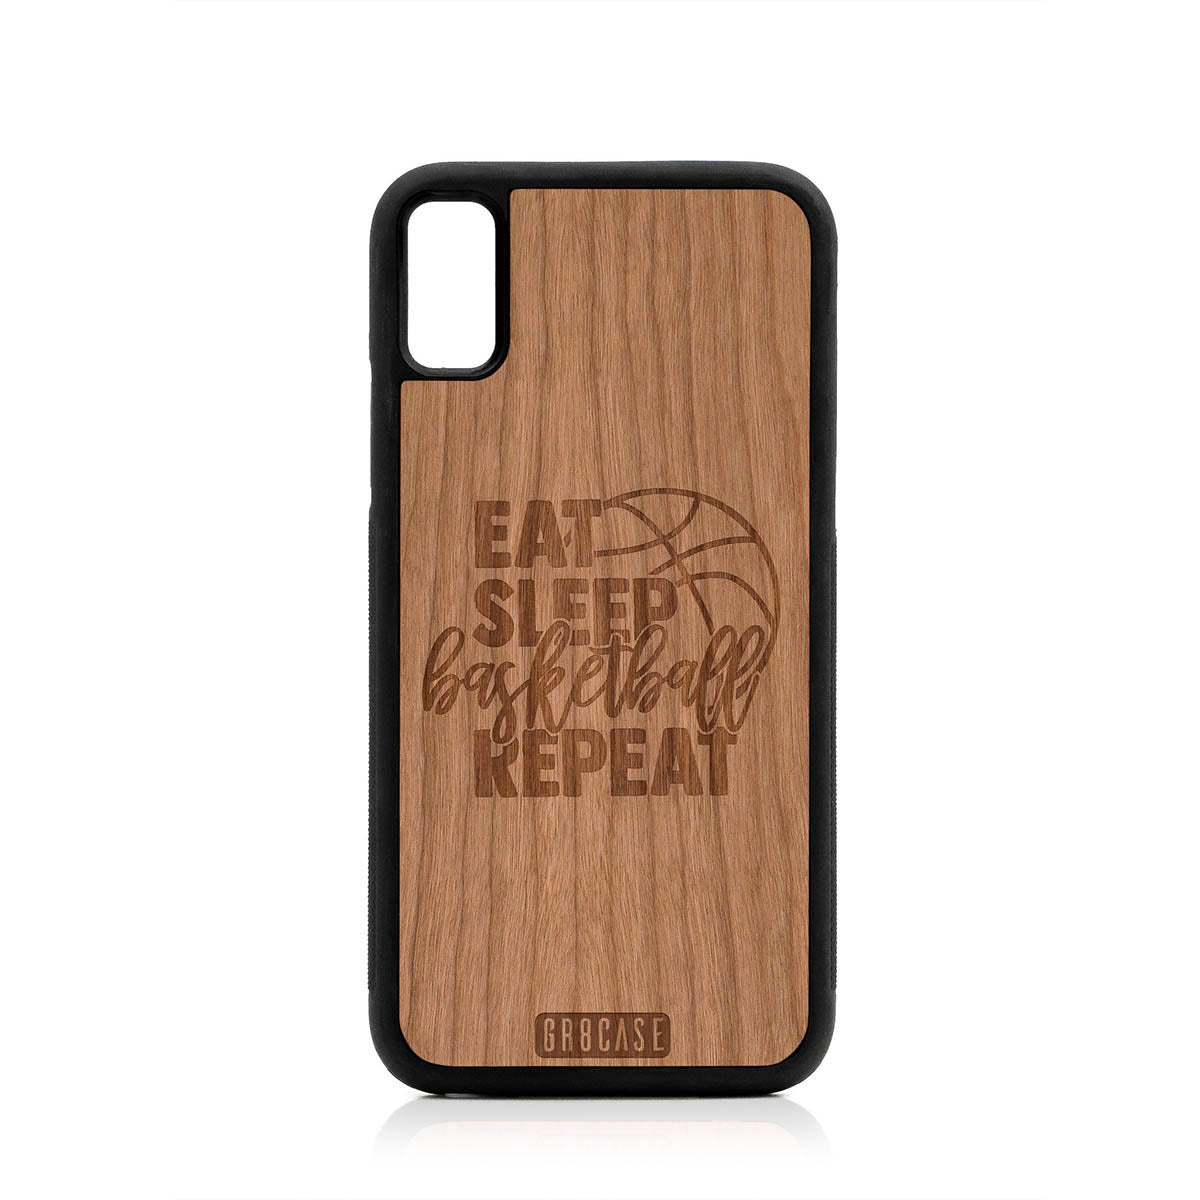 Eat Sleep Basketball Repeat Design Wood Case For iPhone XR